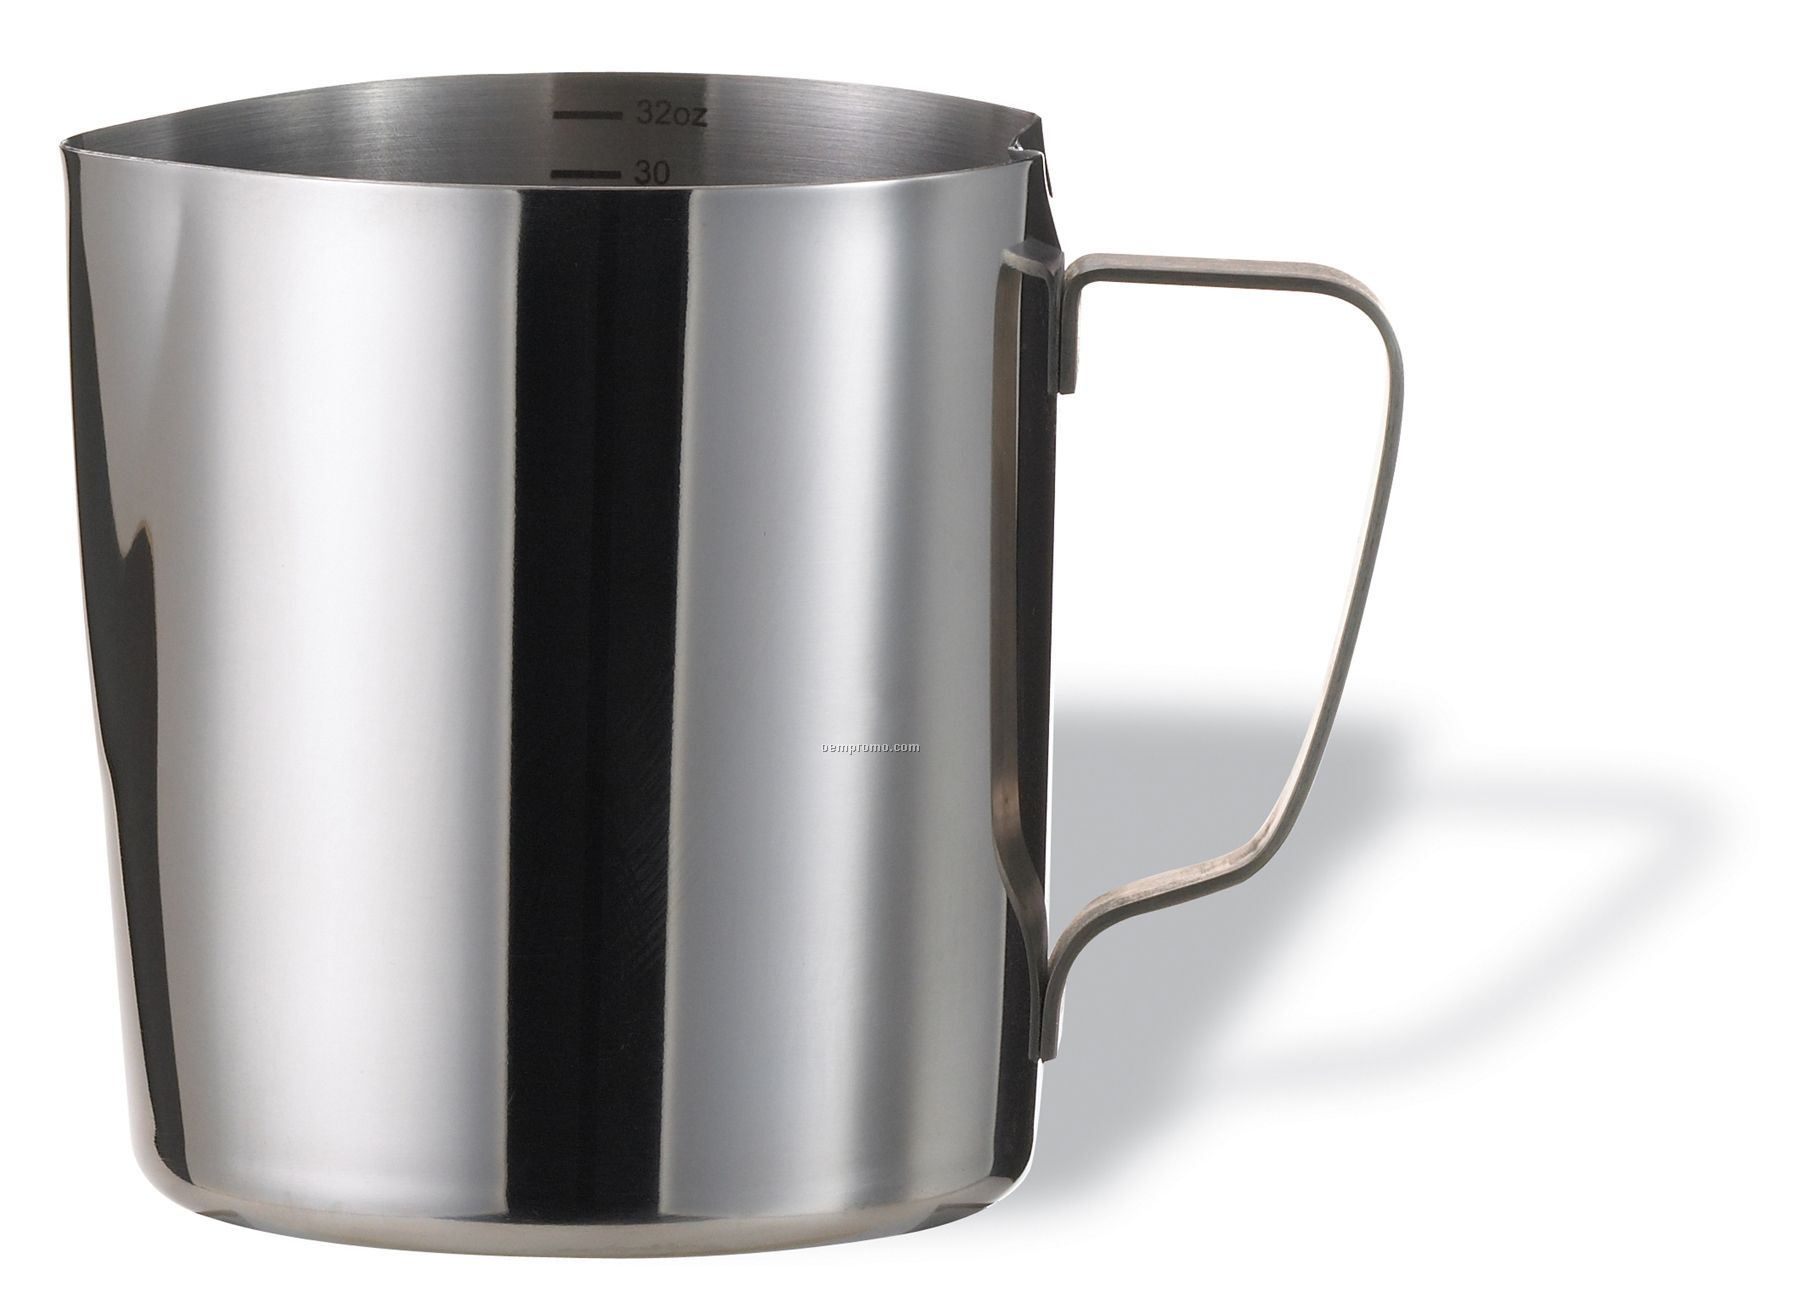 32 Oz. Stainless Steel Frothing Pitcher